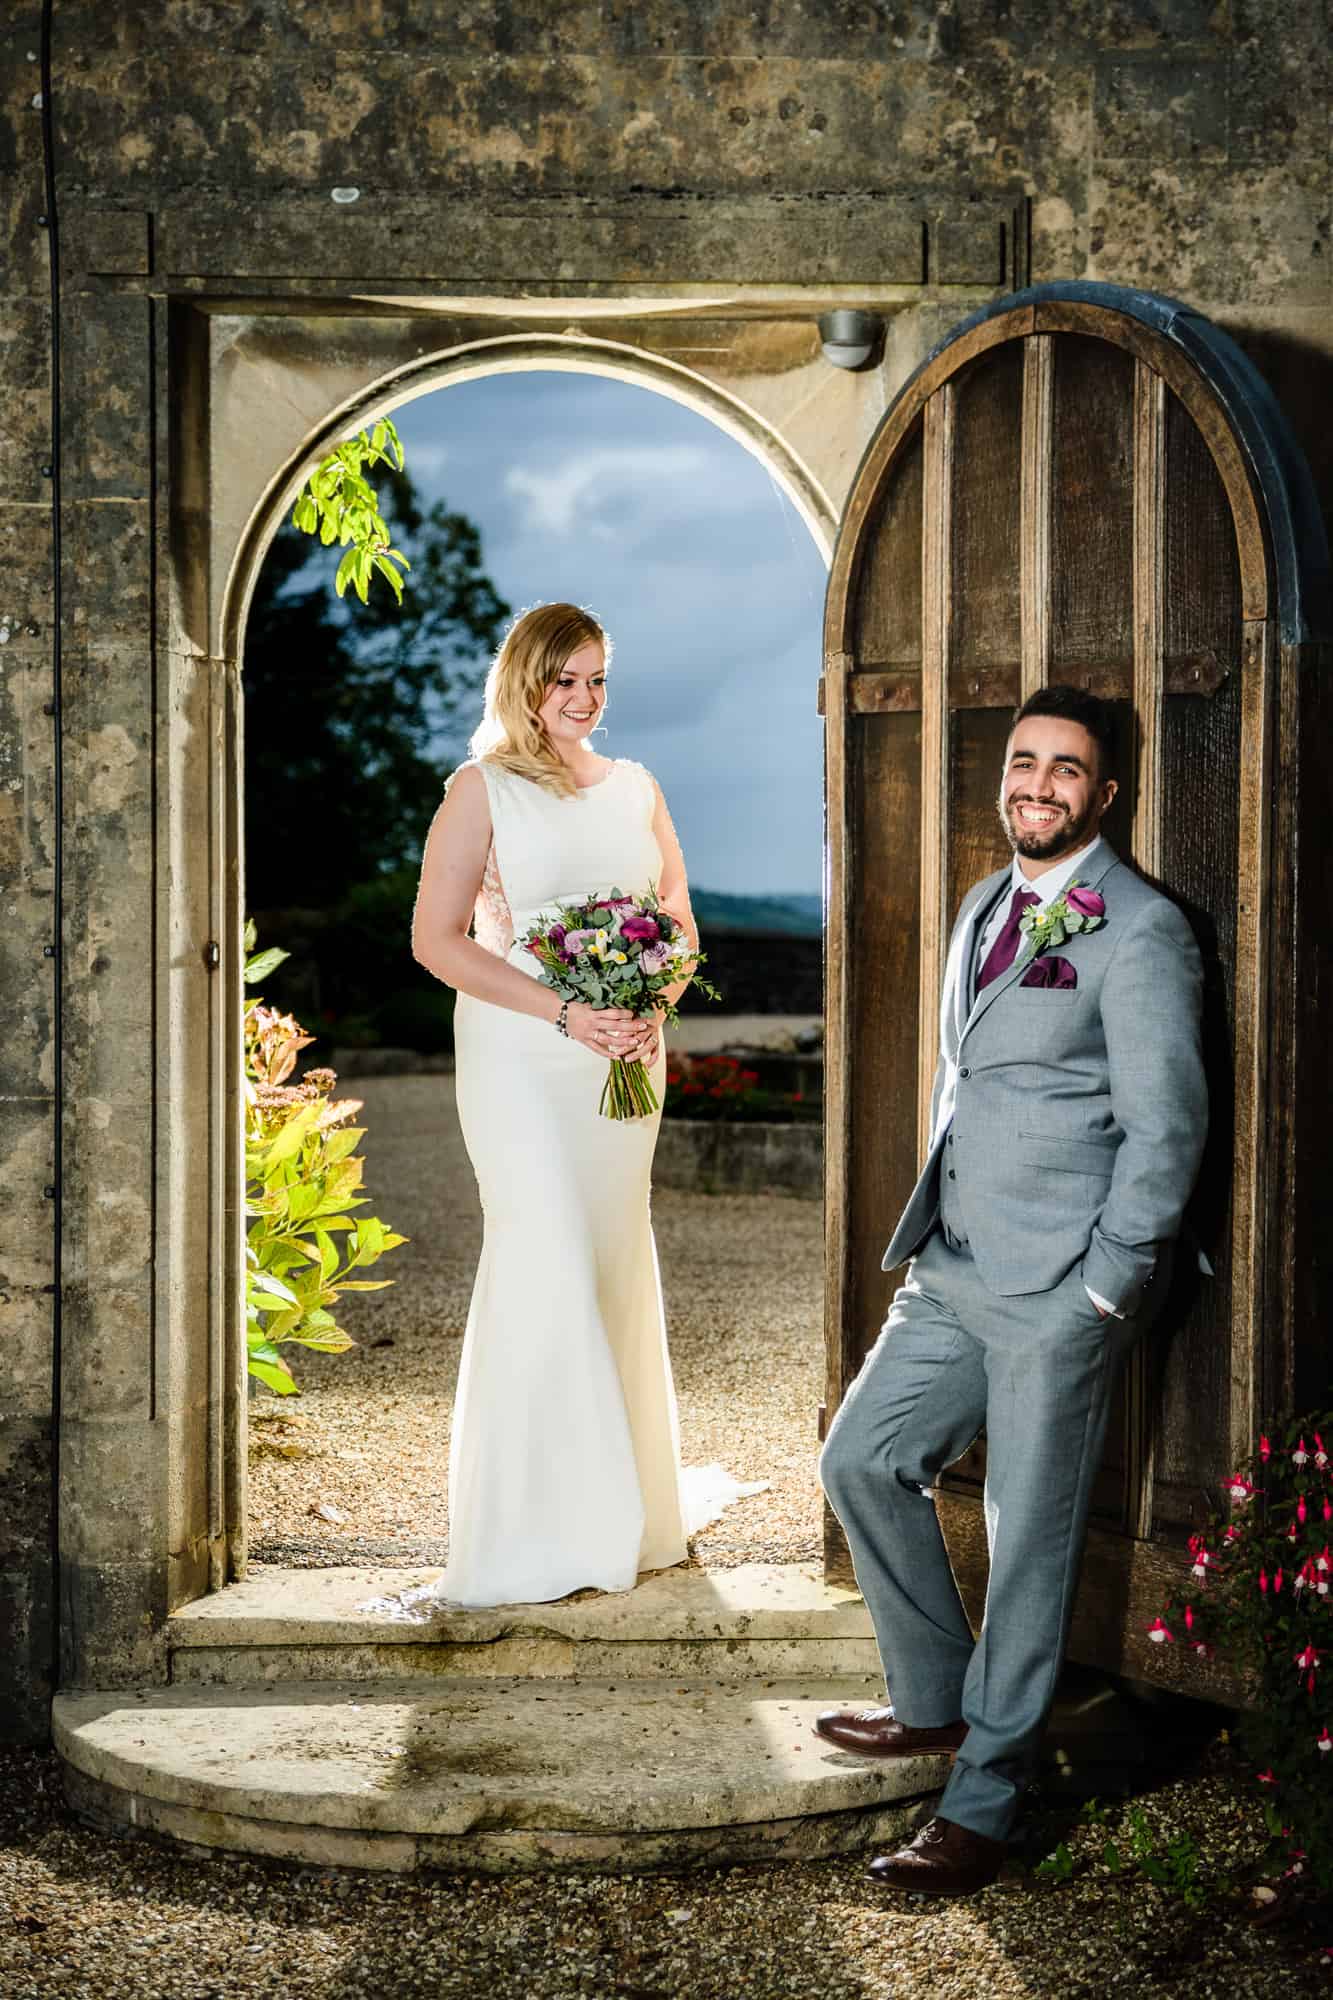 Creative Wedding Photography at Coombe Lodge